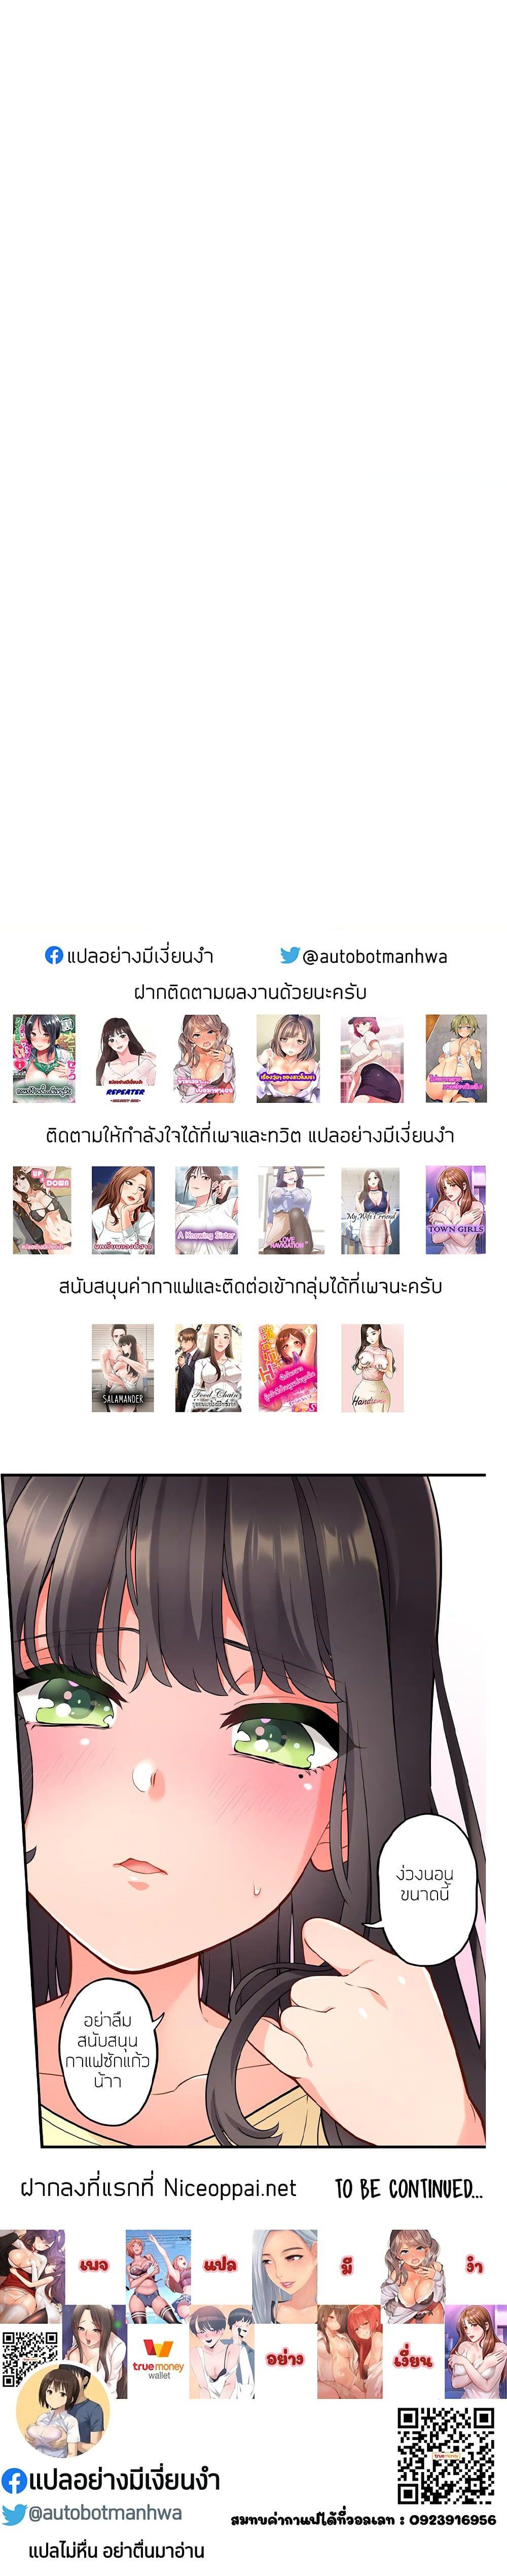 A Knowing Sister 13 ภาพ 29